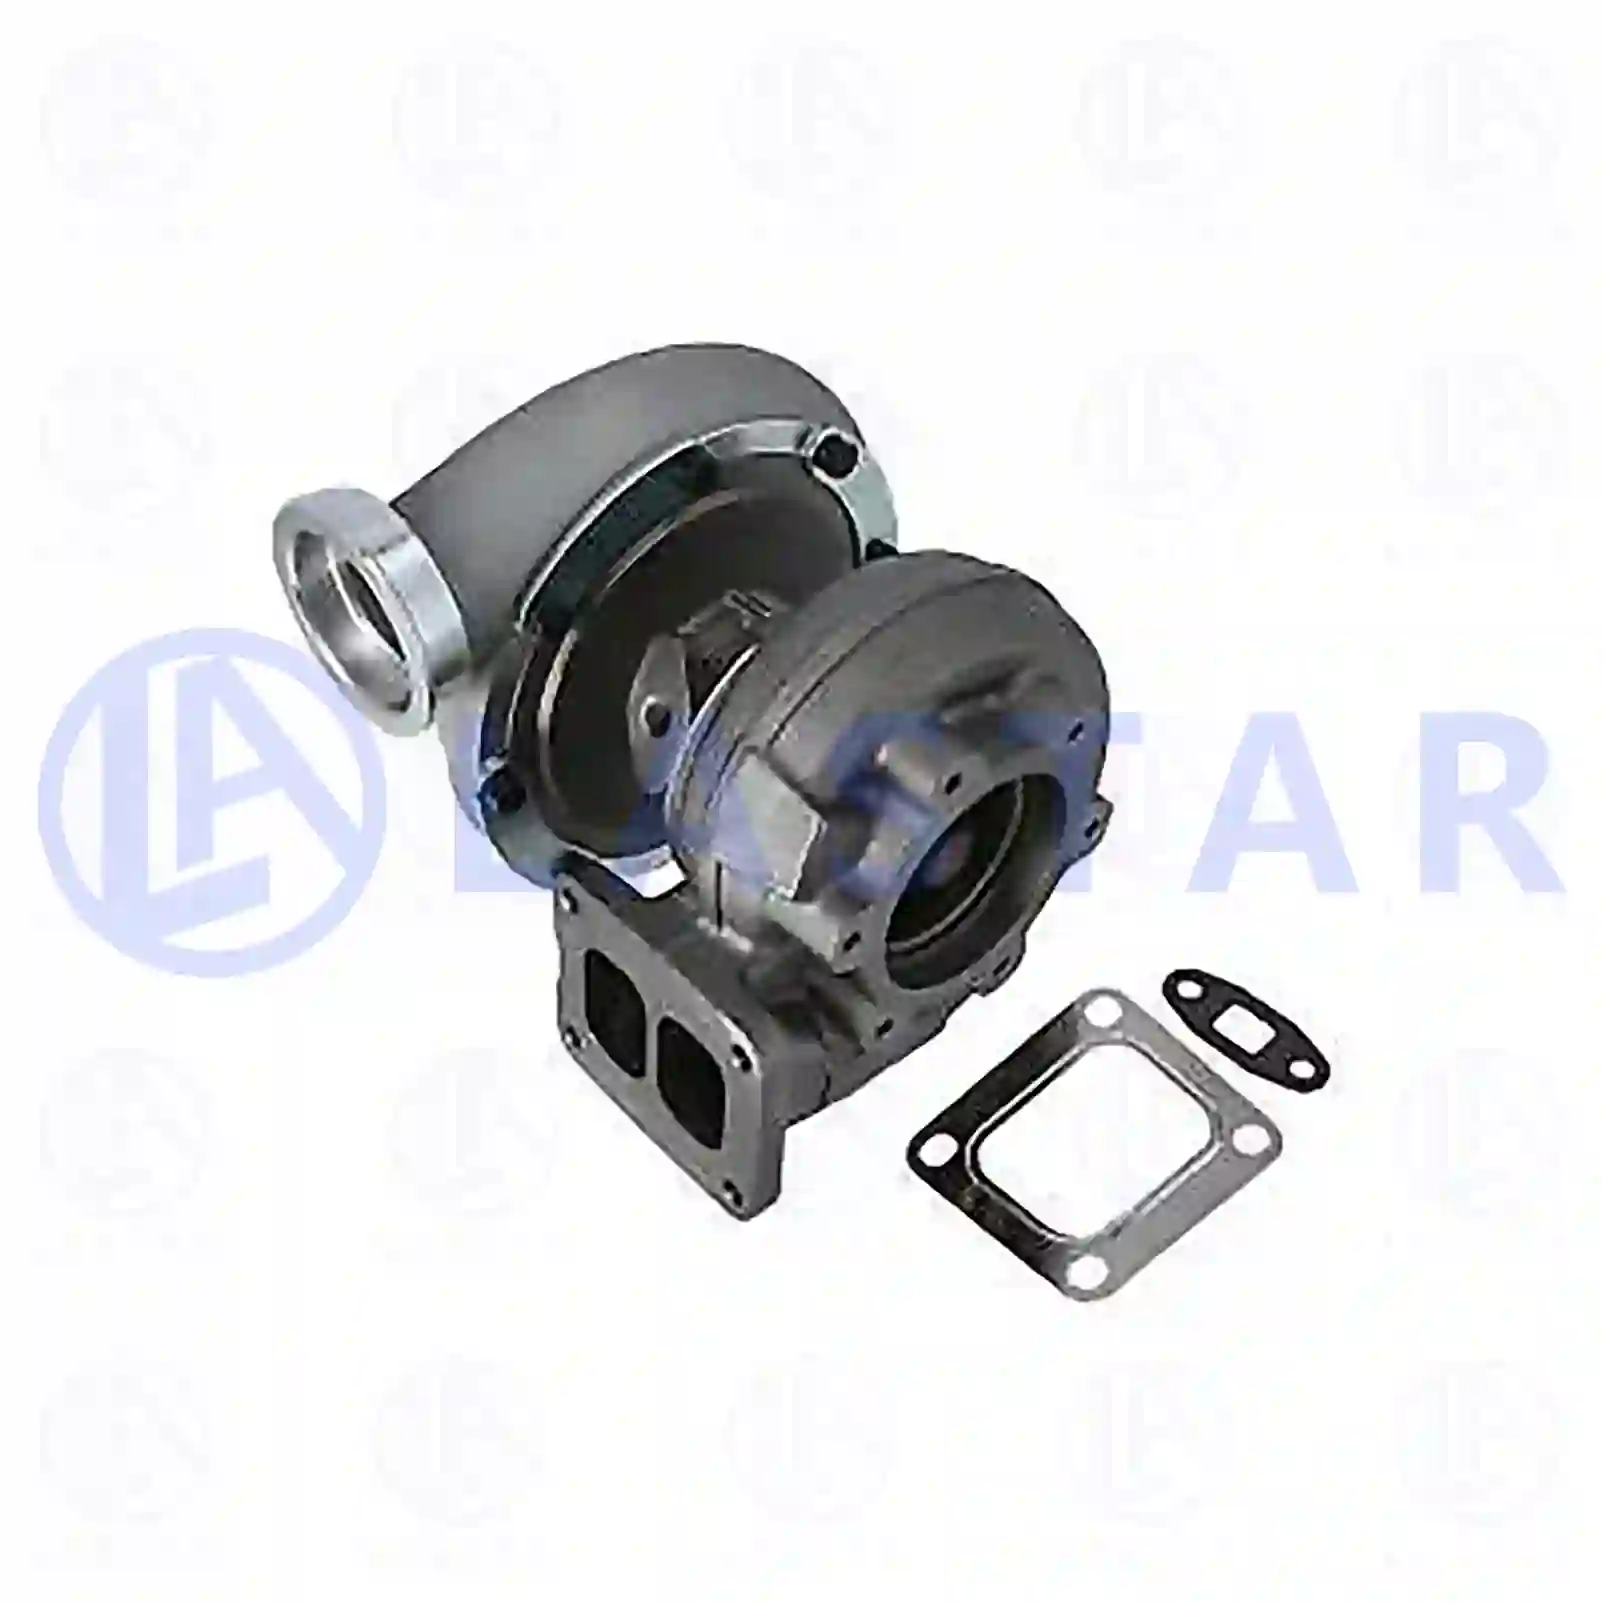 Turbocharger, with gasket kit, 77700425, 5010330290, 5000694702, 5001836957, 5001845678, 5001857085, 5010330290, 5010412248, 5010542005 ||  77700425 Lastar Spare Part | Truck Spare Parts, Auotomotive Spare Parts Turbocharger, with gasket kit, 77700425, 5010330290, 5000694702, 5001836957, 5001845678, 5001857085, 5010330290, 5010412248, 5010542005 ||  77700425 Lastar Spare Part | Truck Spare Parts, Auotomotive Spare Parts